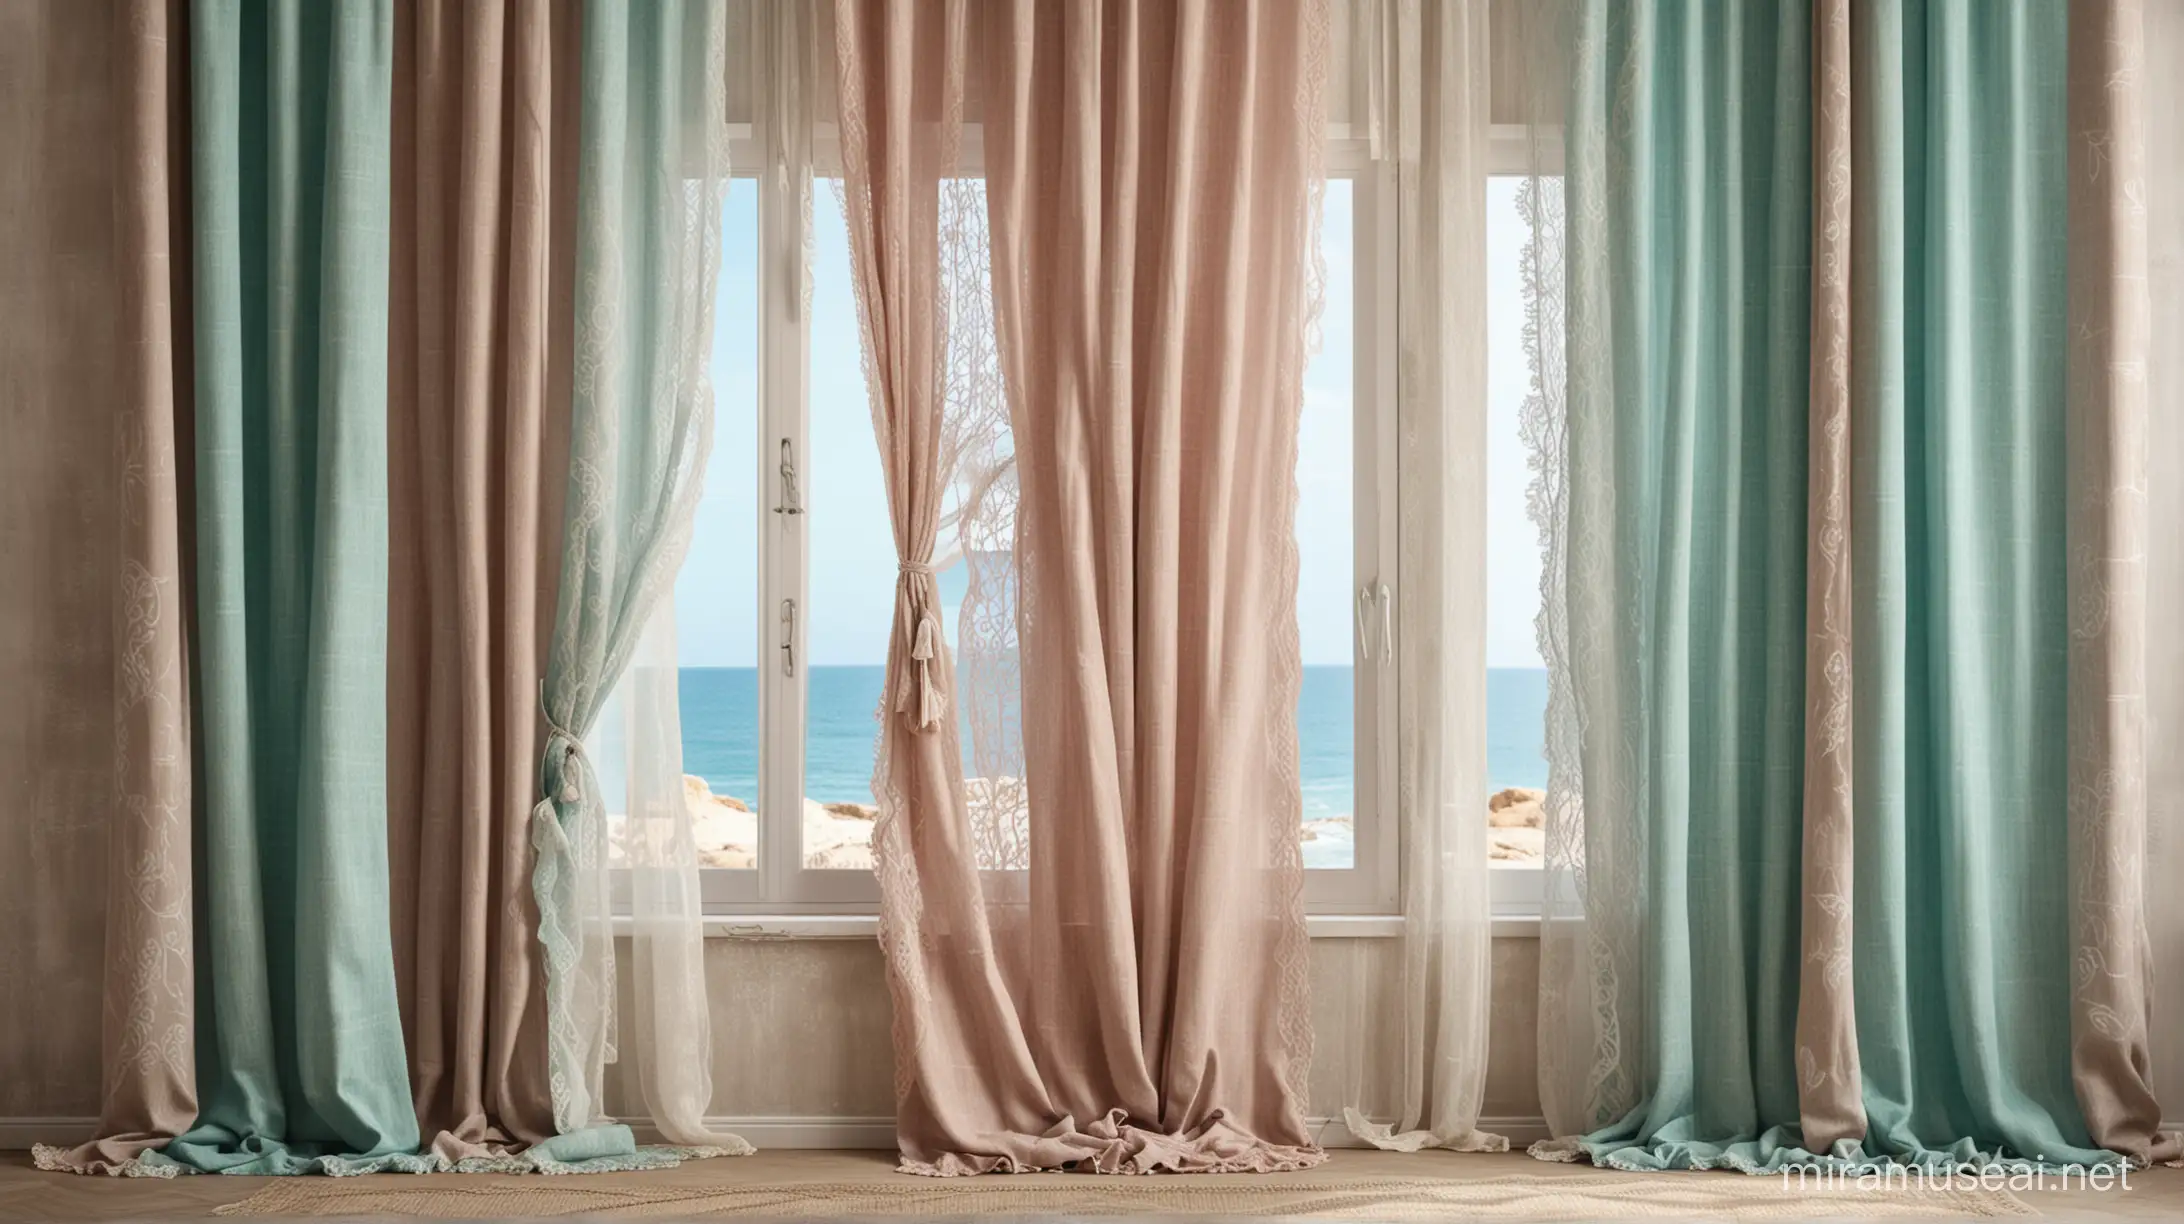 Rustic Window with Lace Curtains in Sand Mauve and Turquoise Tones